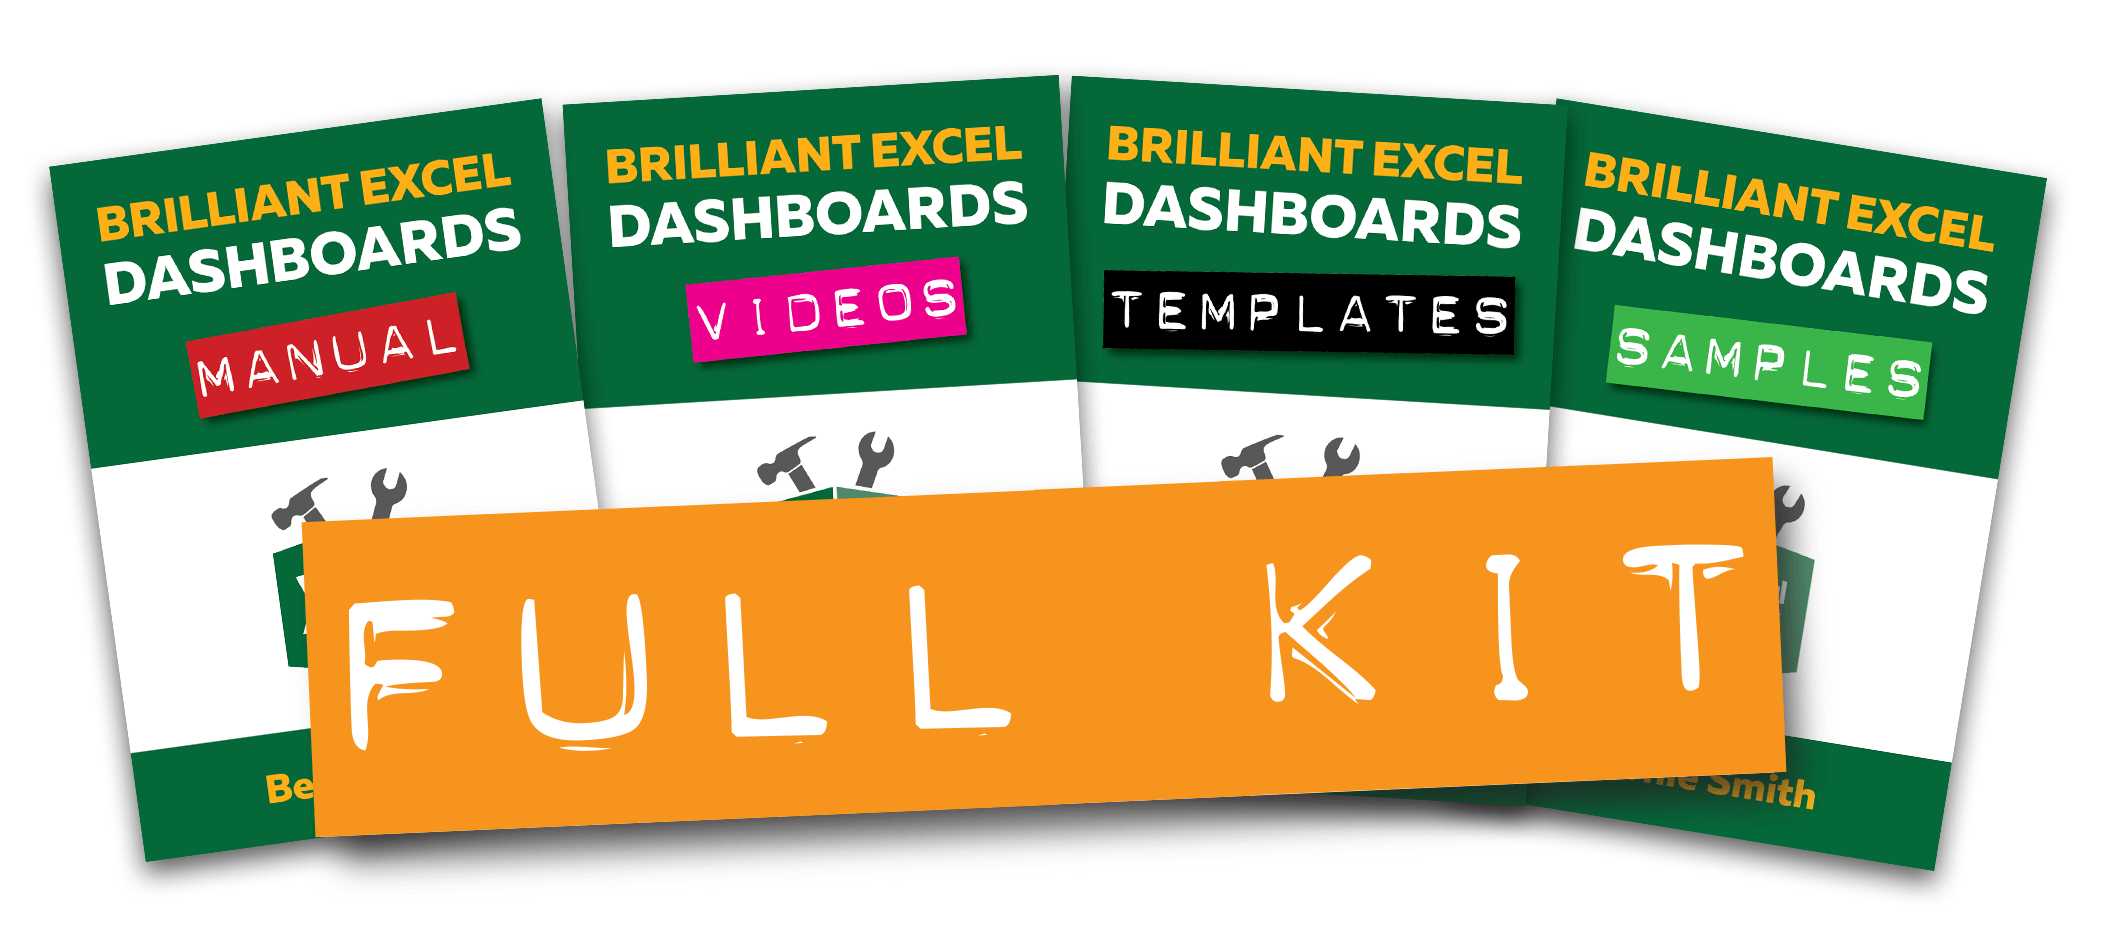 brilliant excel dashboard full kit, showing all four packages